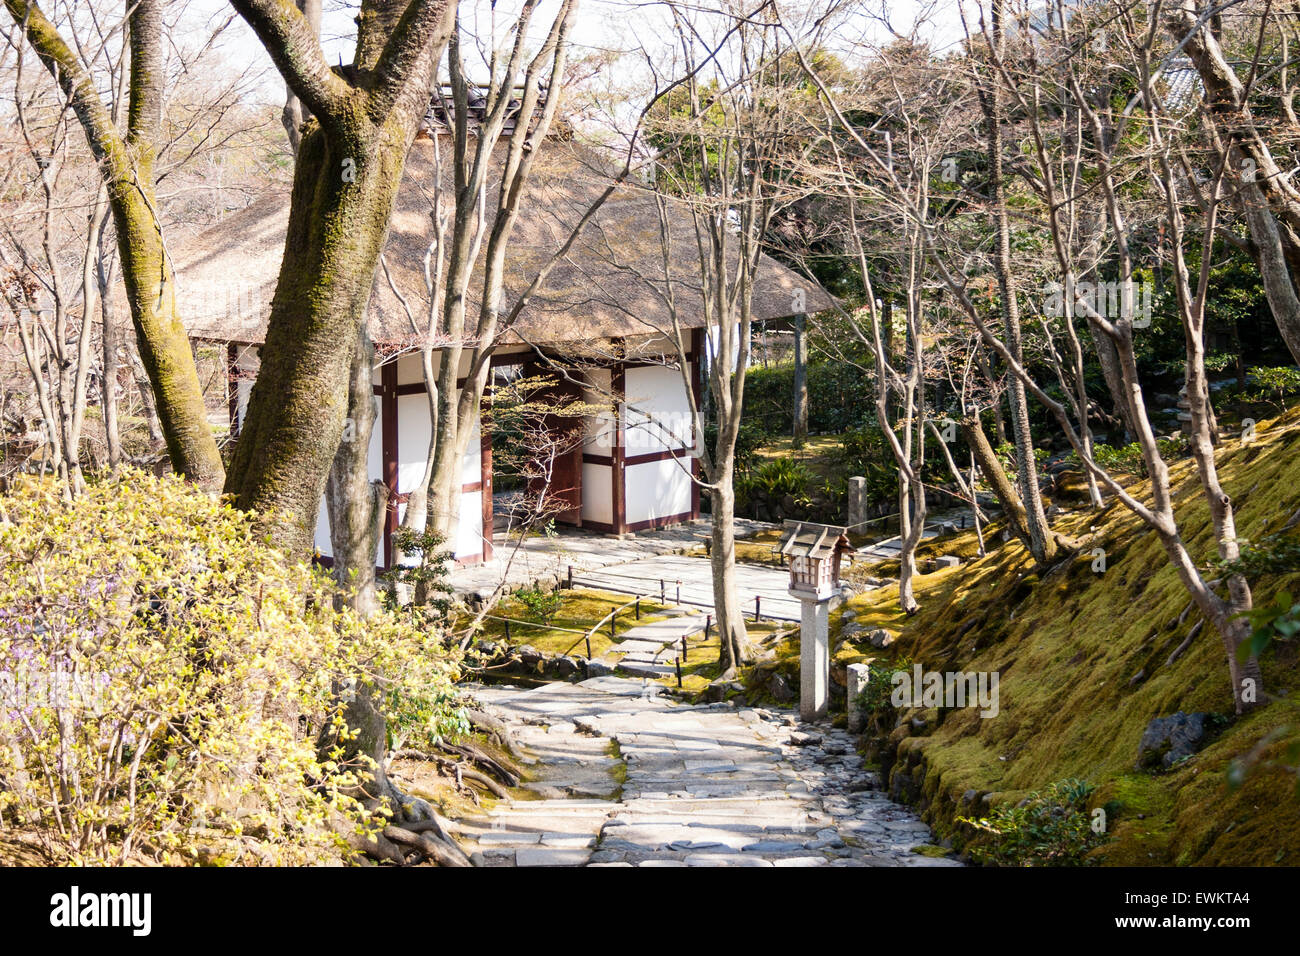 Stone paved footpath leading through embankment with trees on to a small wood and white plaster thatched roof gatehouse at Jojakkoji temple in Kyoto. Stock Photo